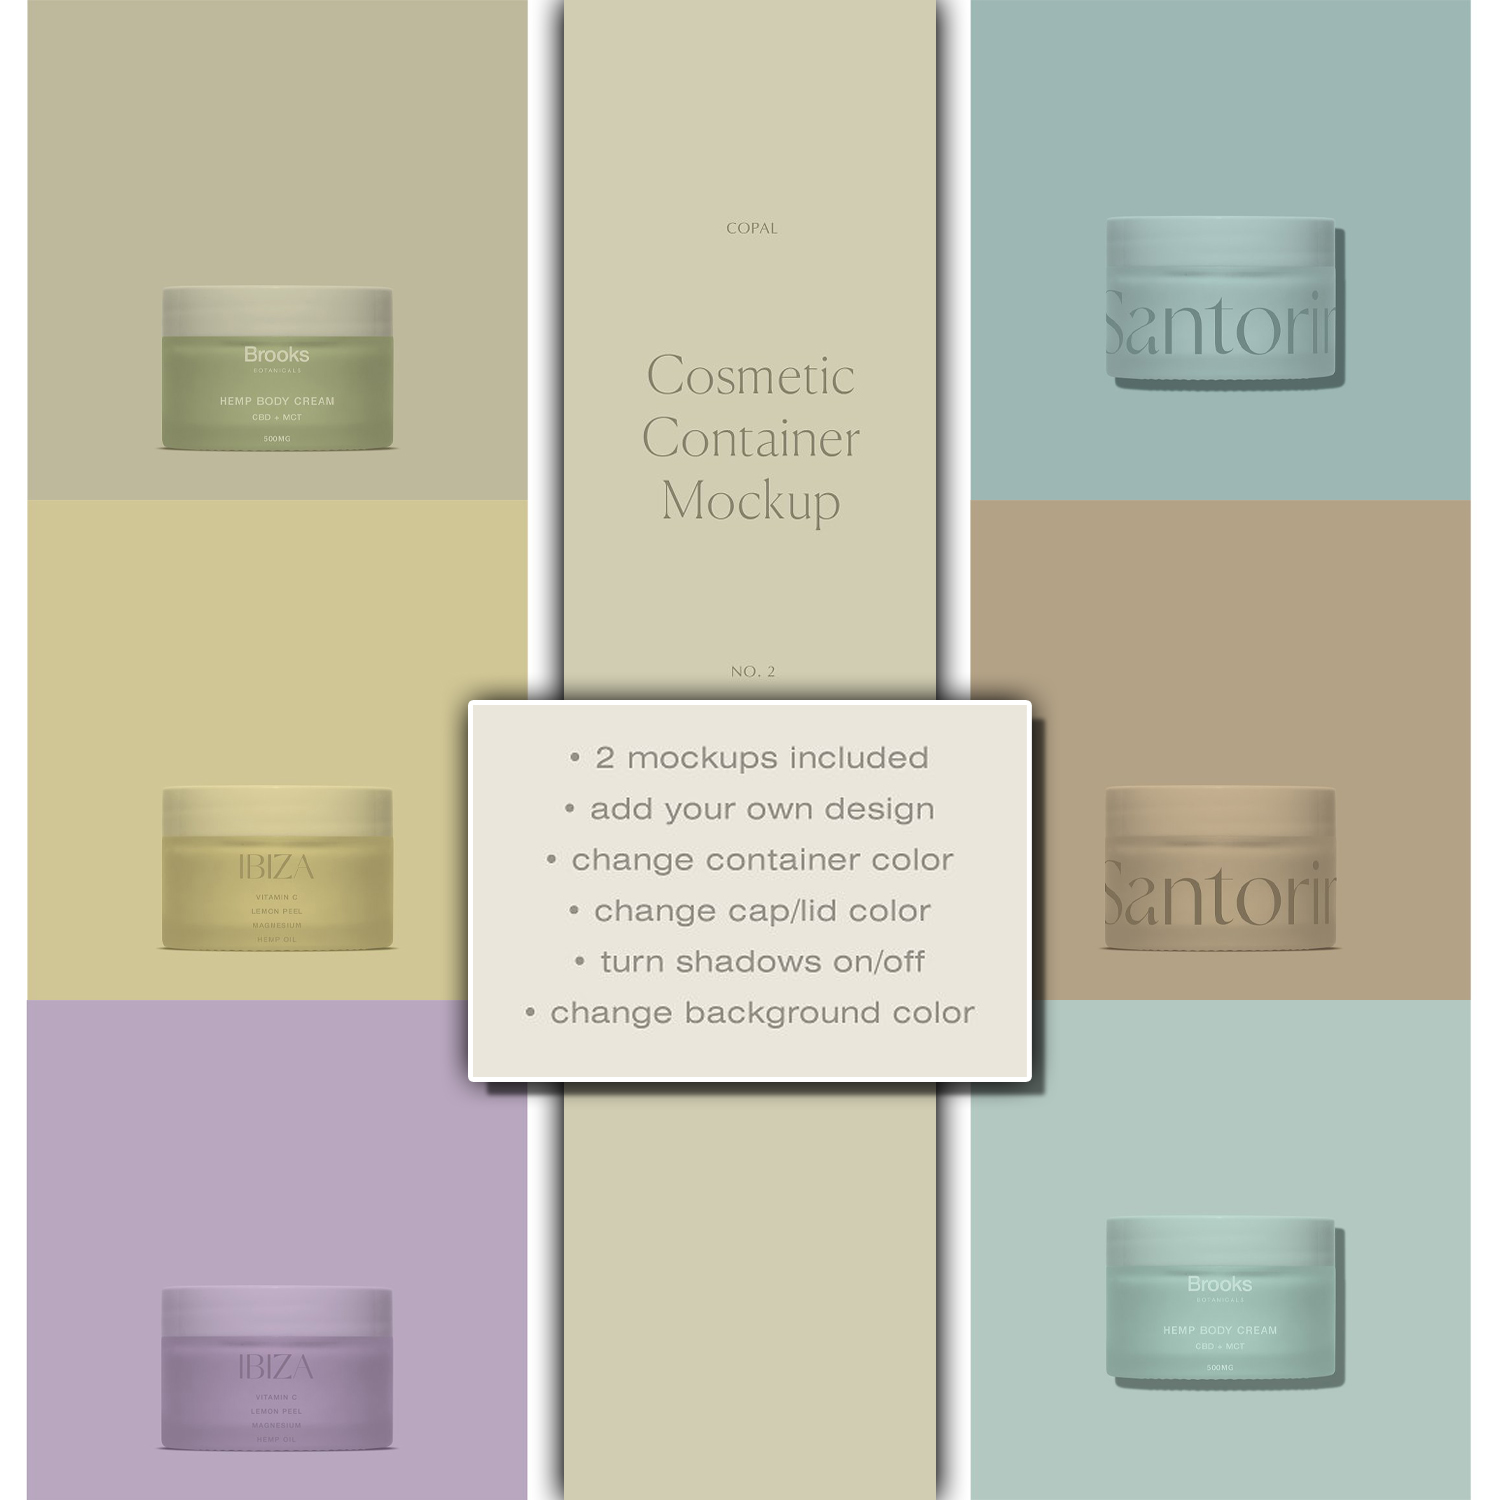 Preview cosmetic container mockup.